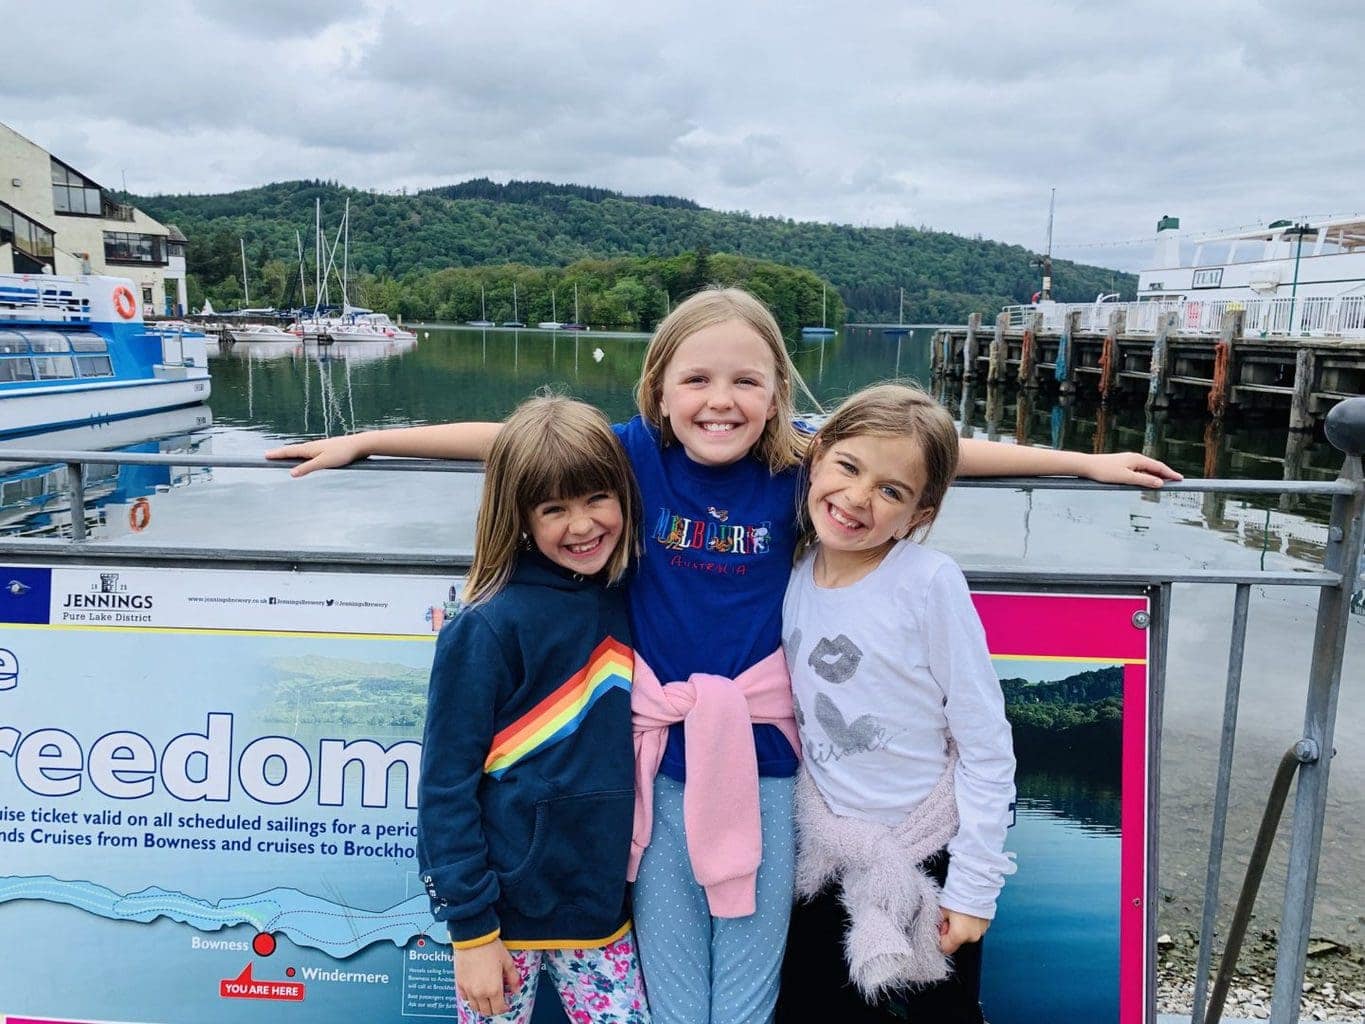 6 Family Fun Adventures on Windermere | Lake District